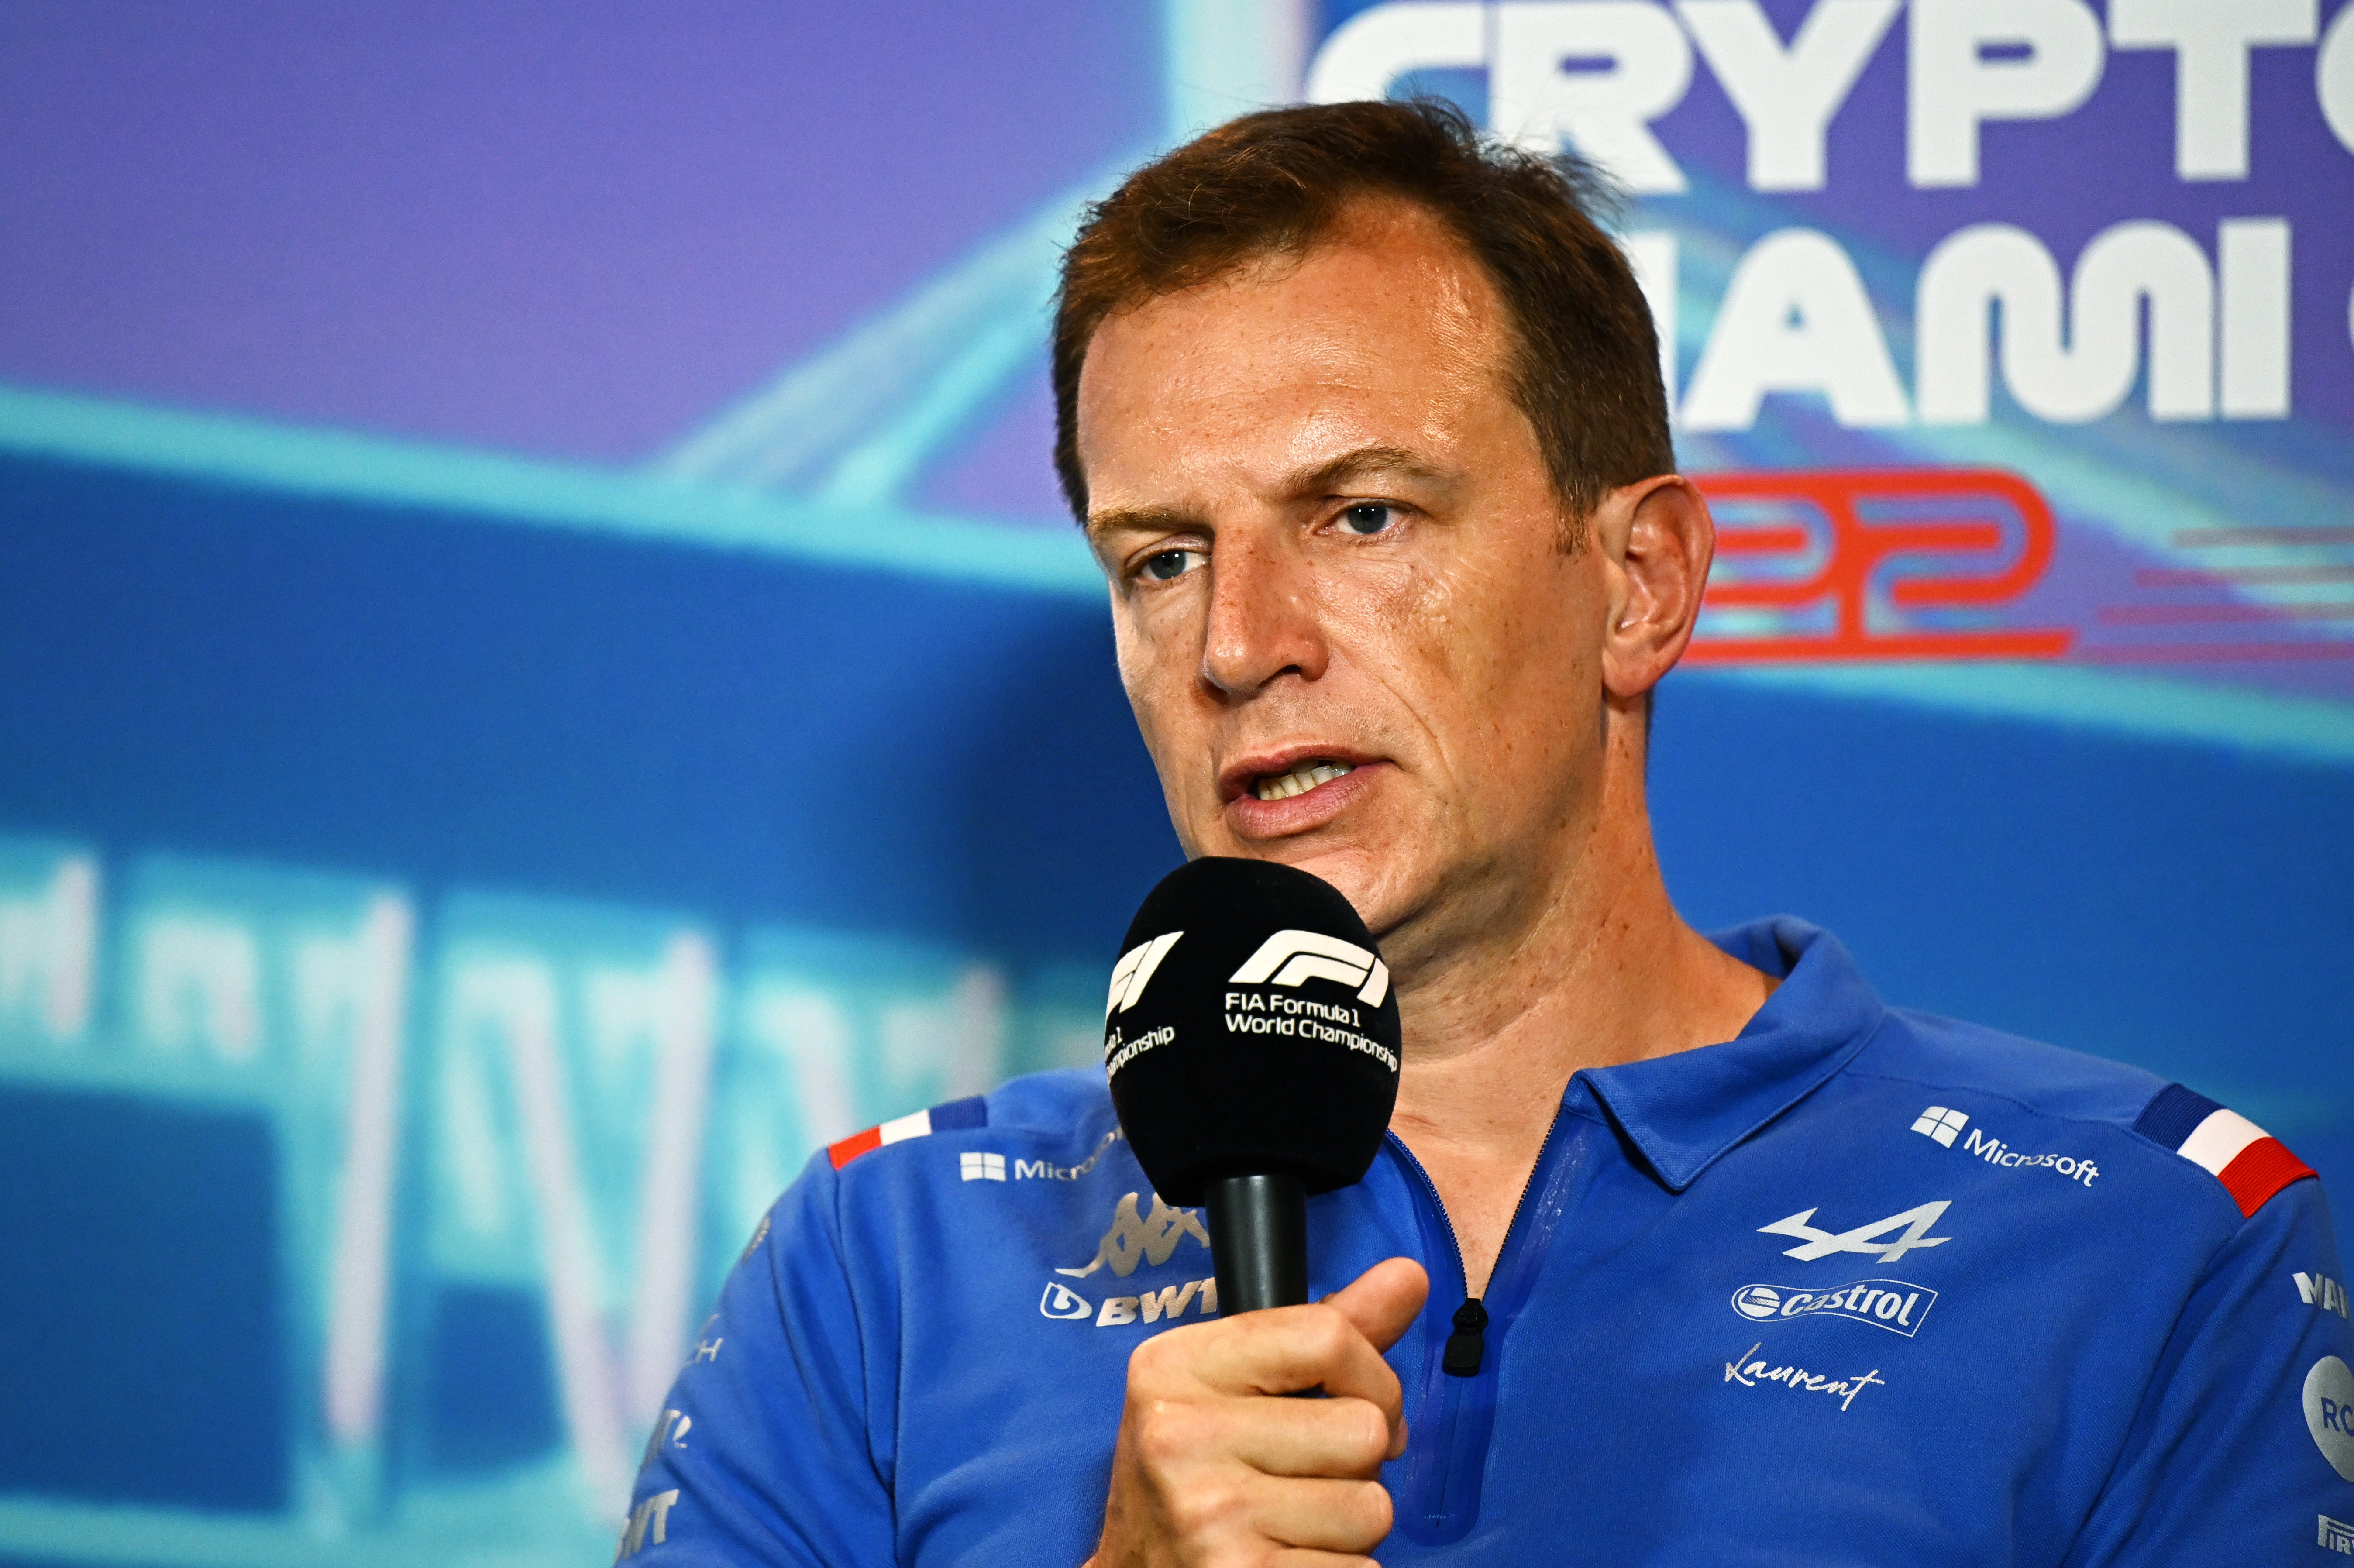 Alpine CEO Laurent Rossi has criticised Oscar Piastri’s approach in the driver market this year